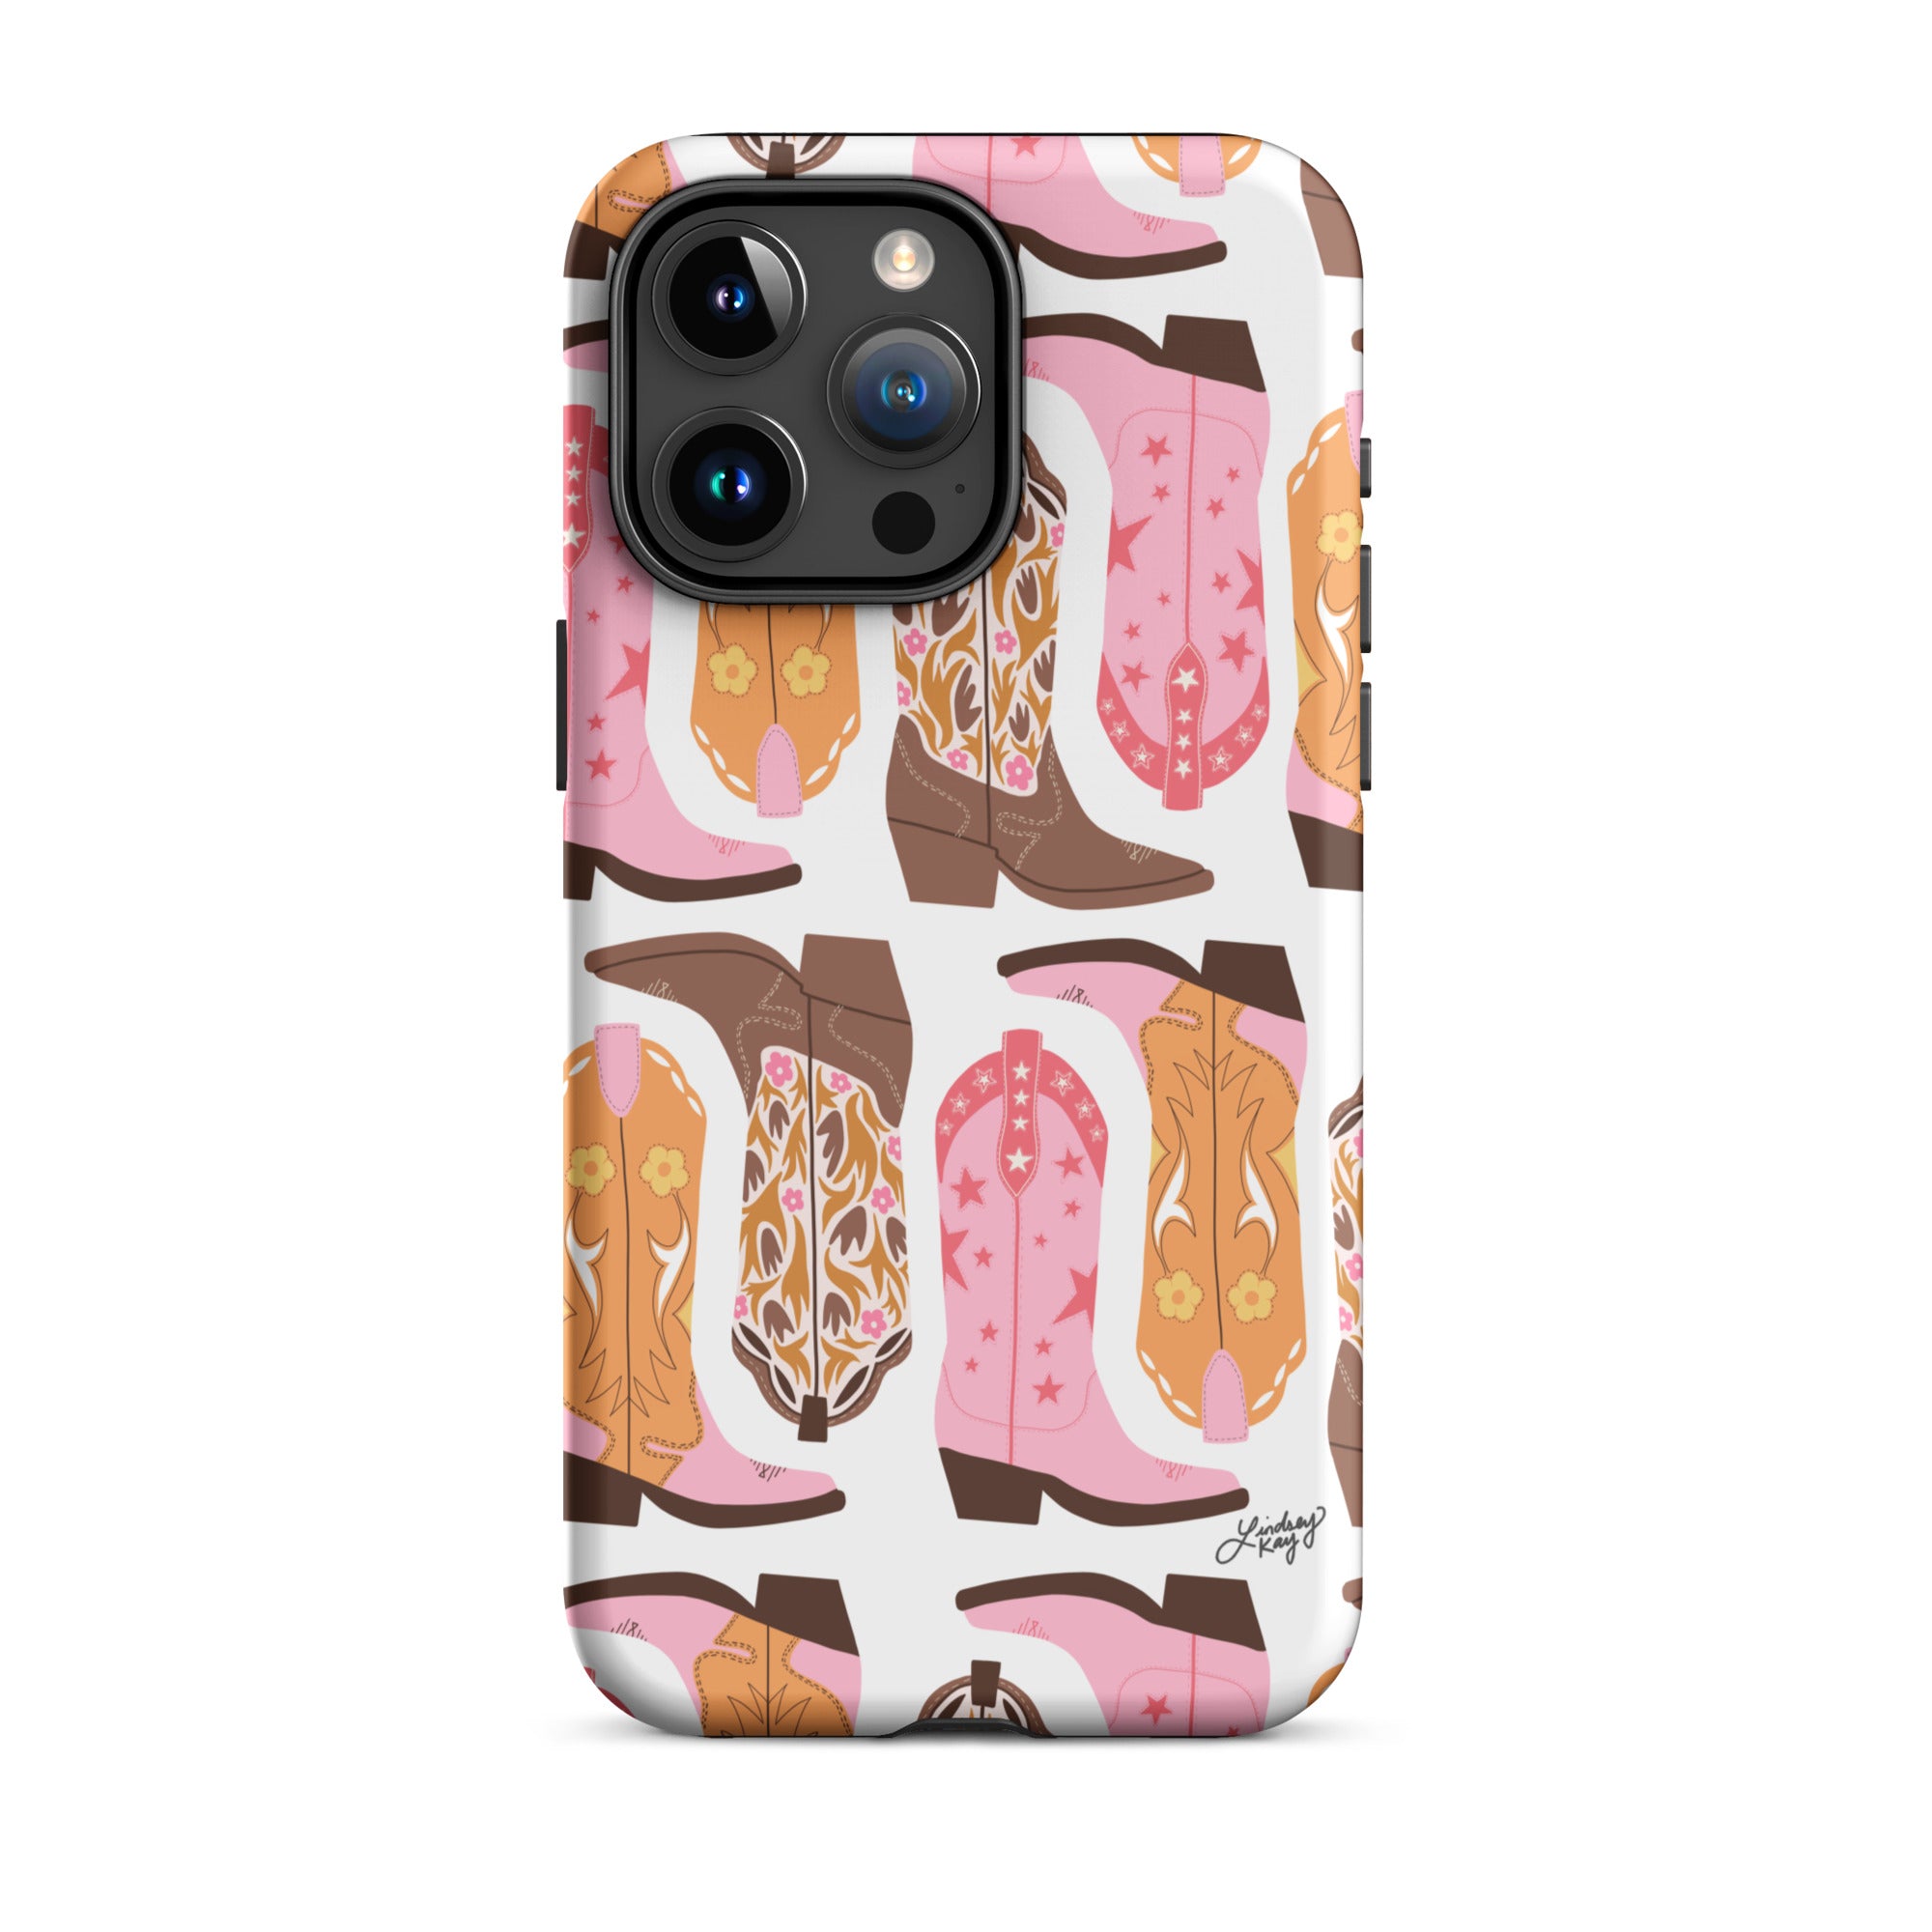 cowgirl boots pattern pink orange brown illustration iphone case cover tough otter box cute country western chic accessories iphone 15 case